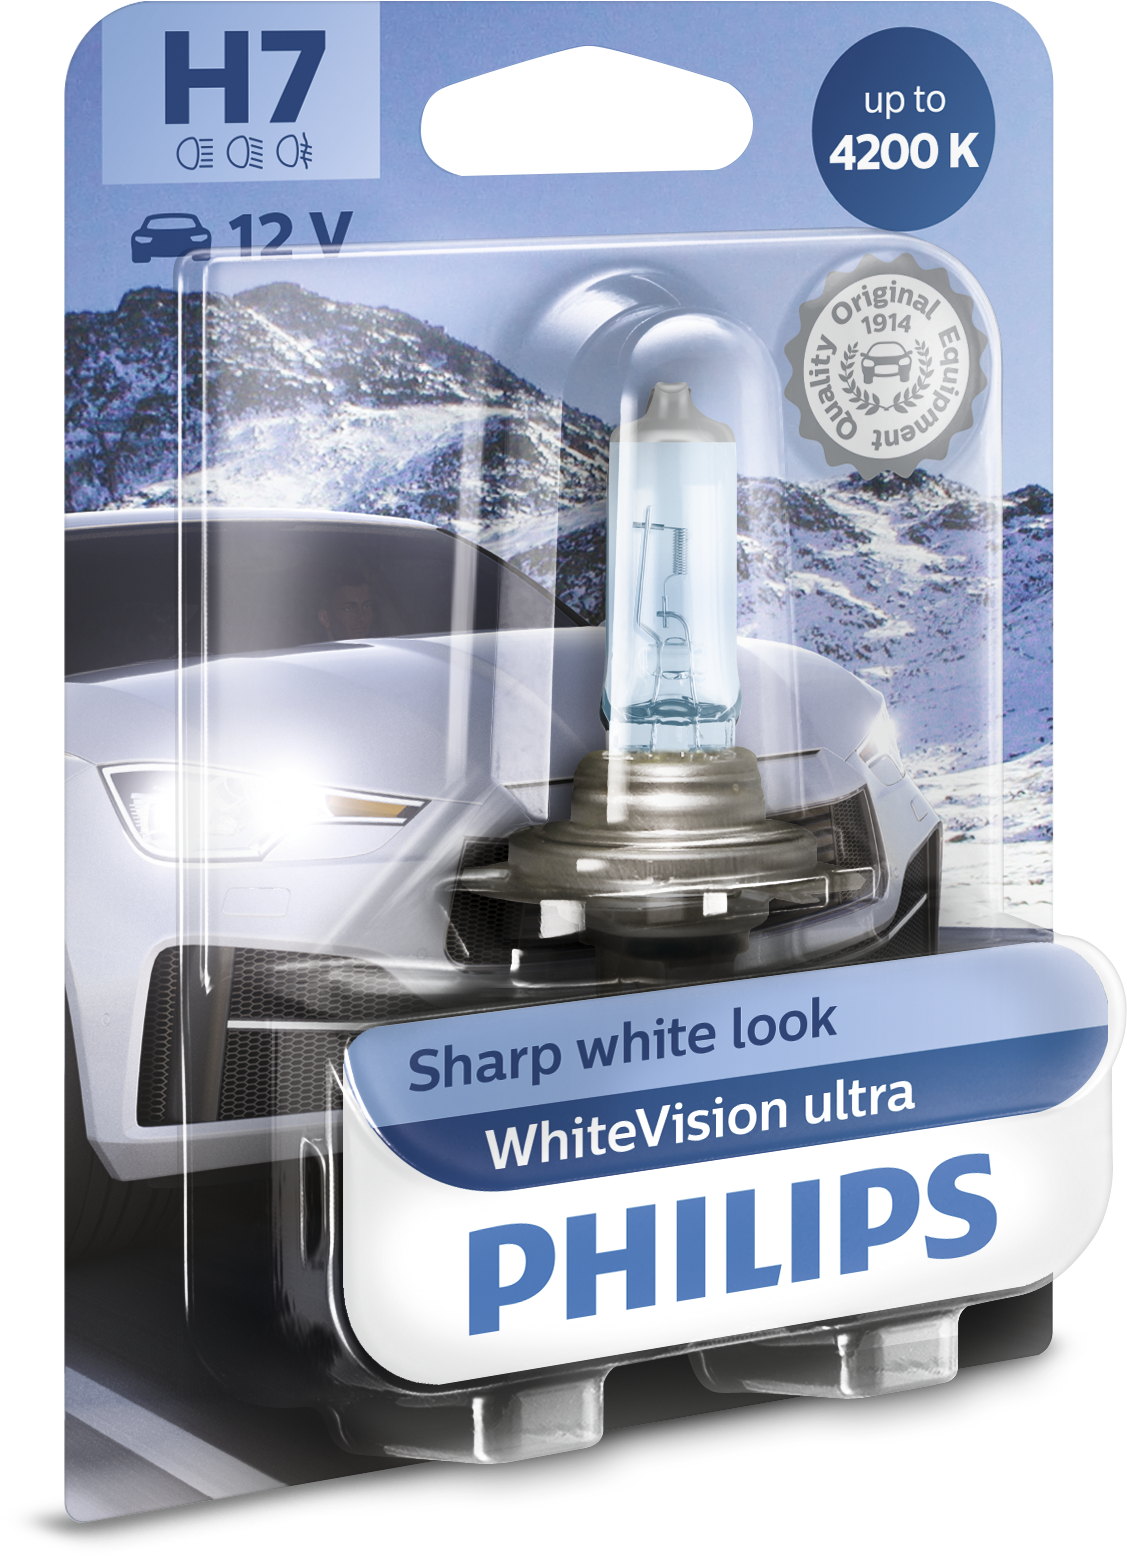 Philips H7 WhiteVision ultra